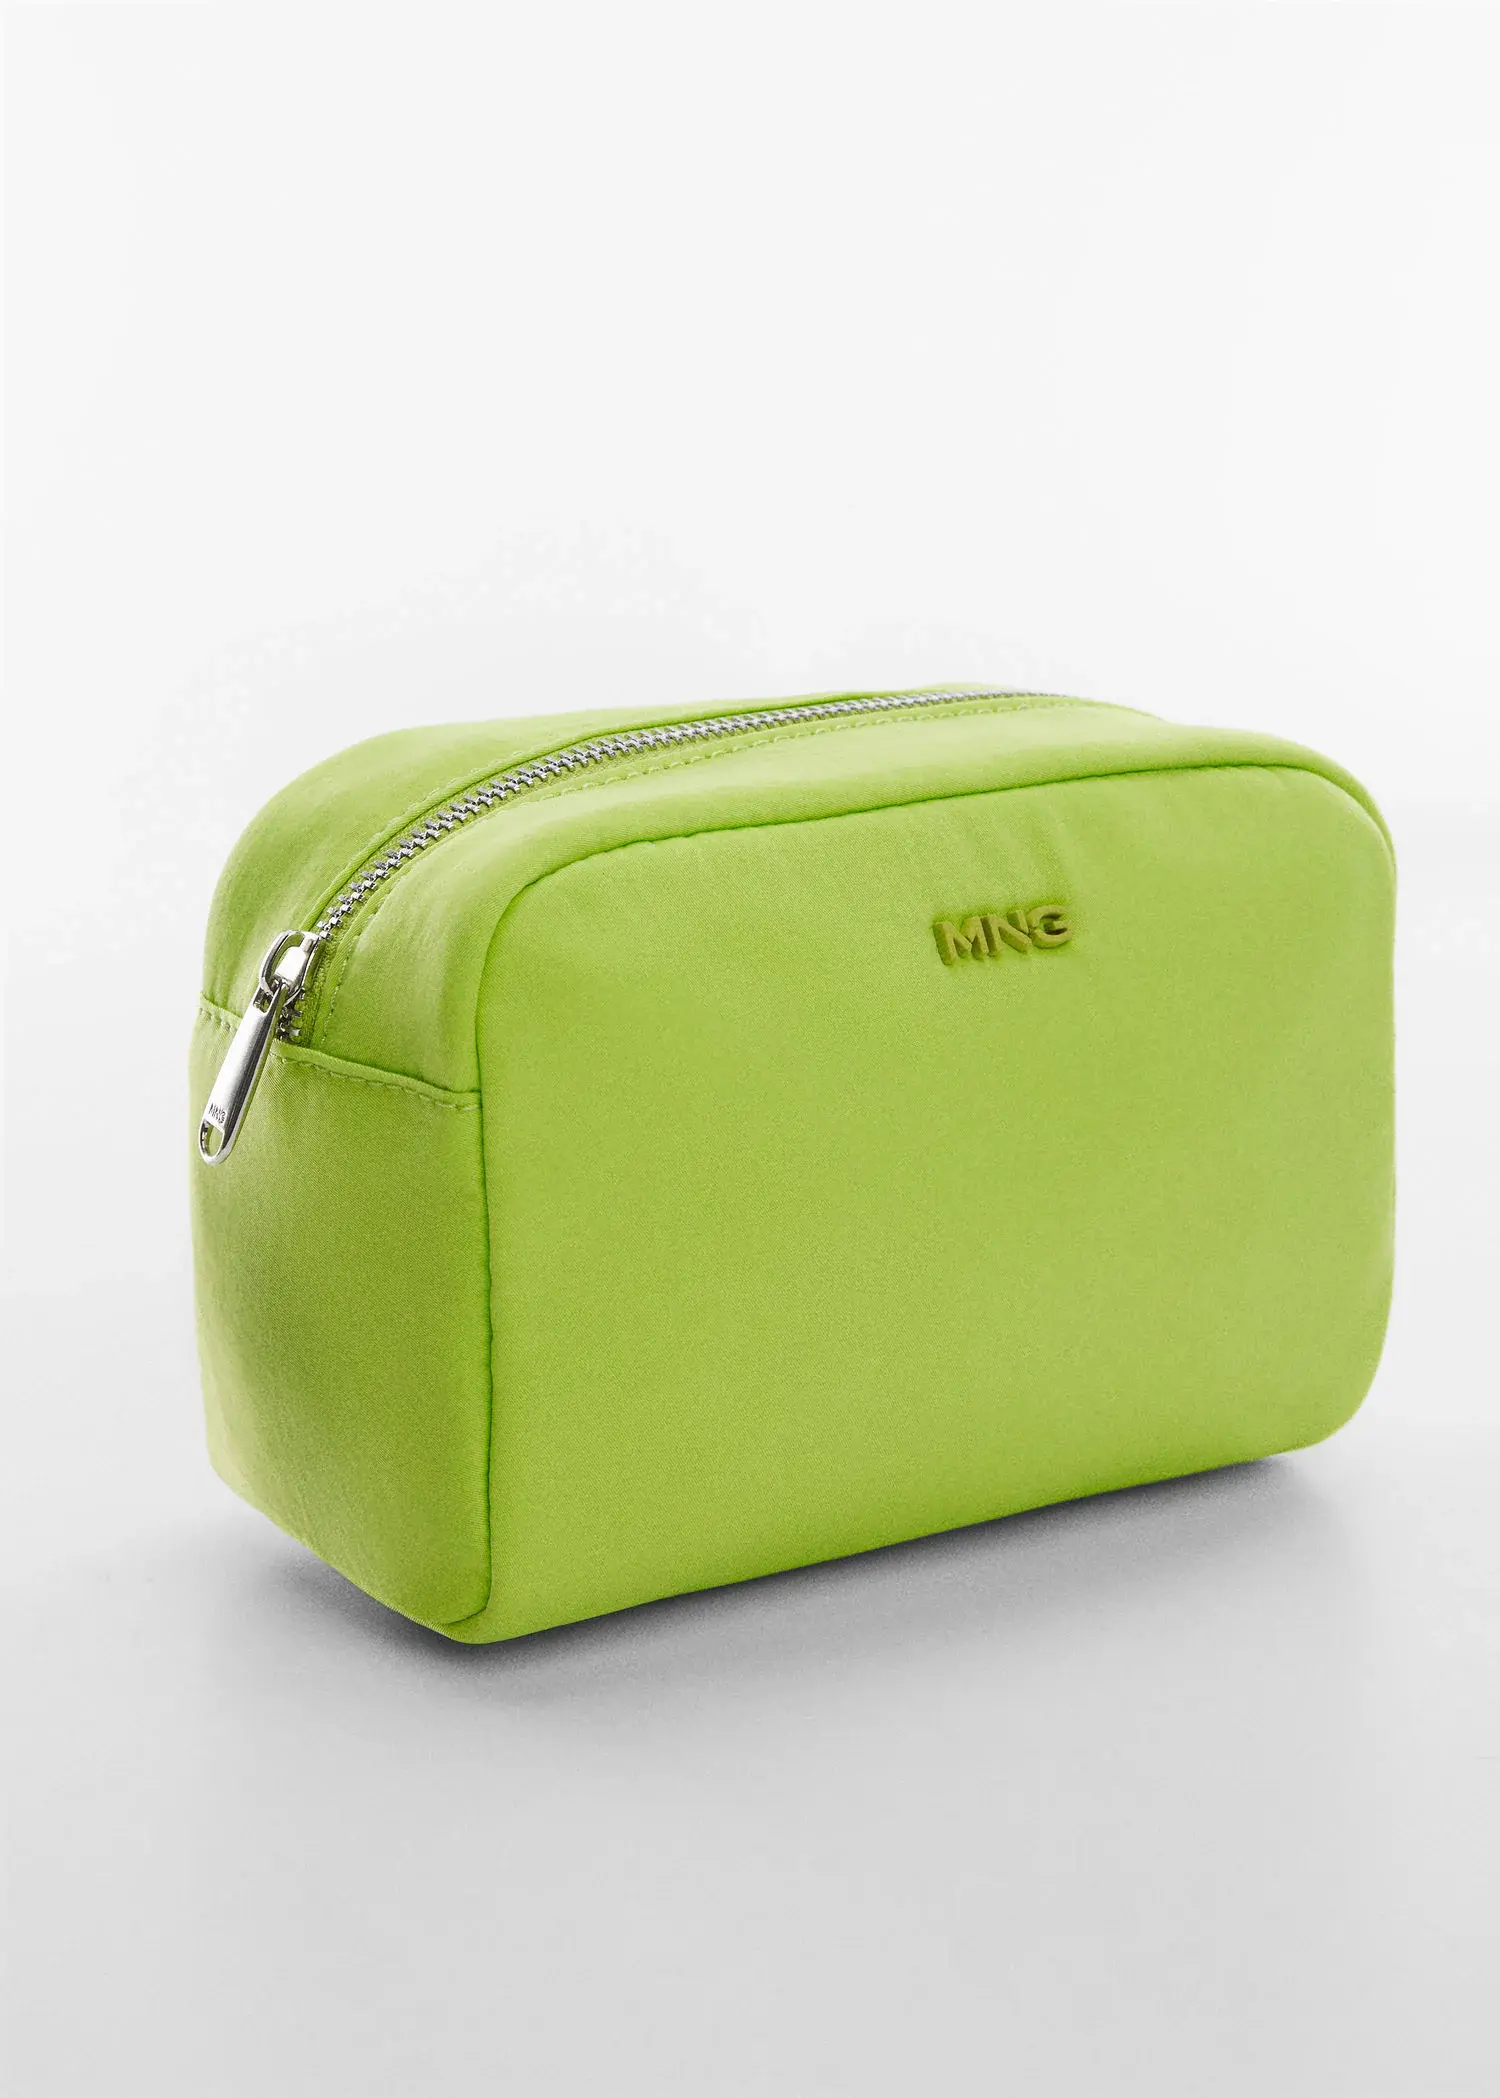 Mango Zippered toiletry bag with logo. a lime green bag sitting on top of a white table. 